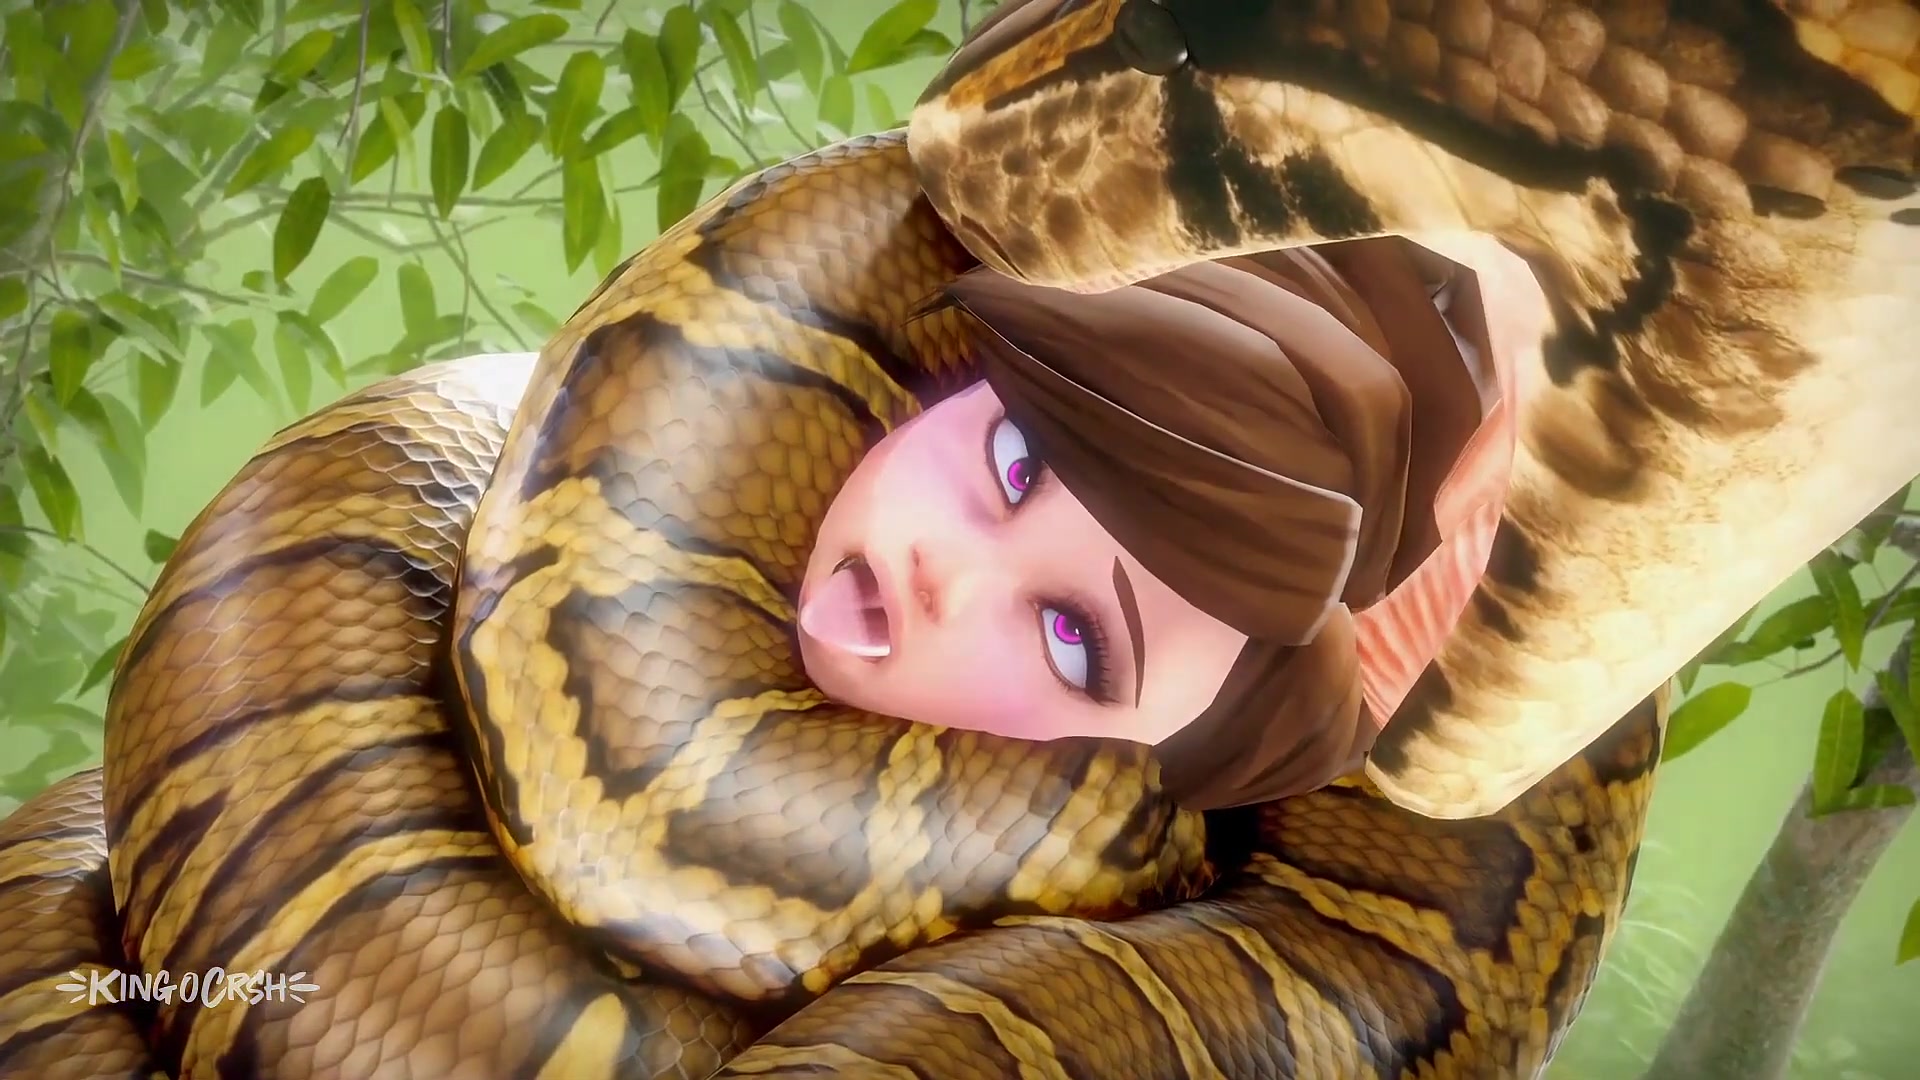 Snake constricting before vore. *king o crsh - ThisVid.com